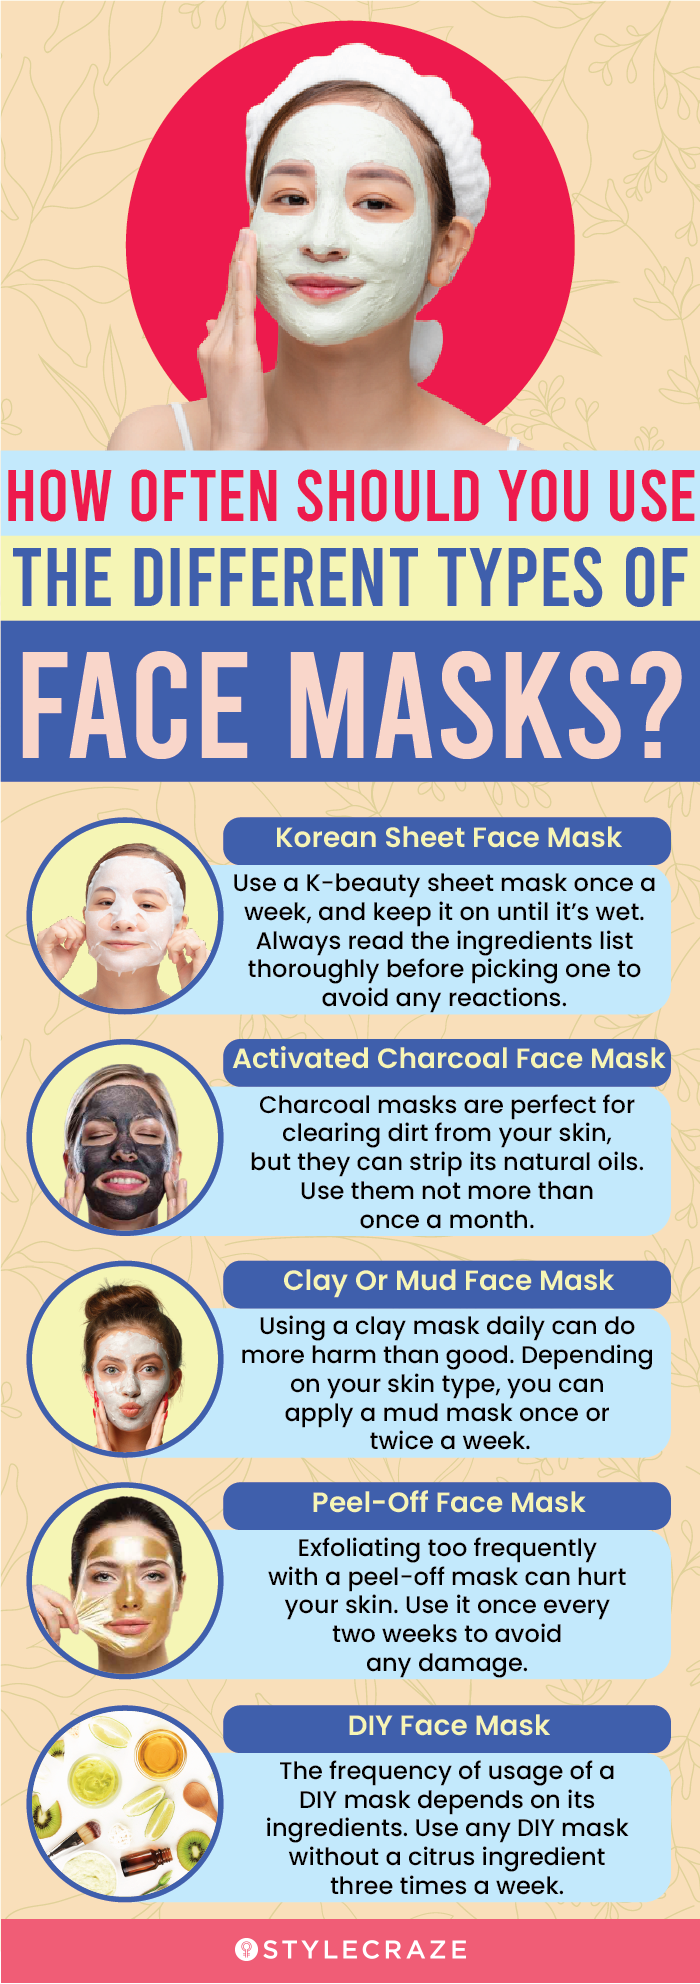 Necklet Ga op pad routine How Often Should You Use Face Masks?